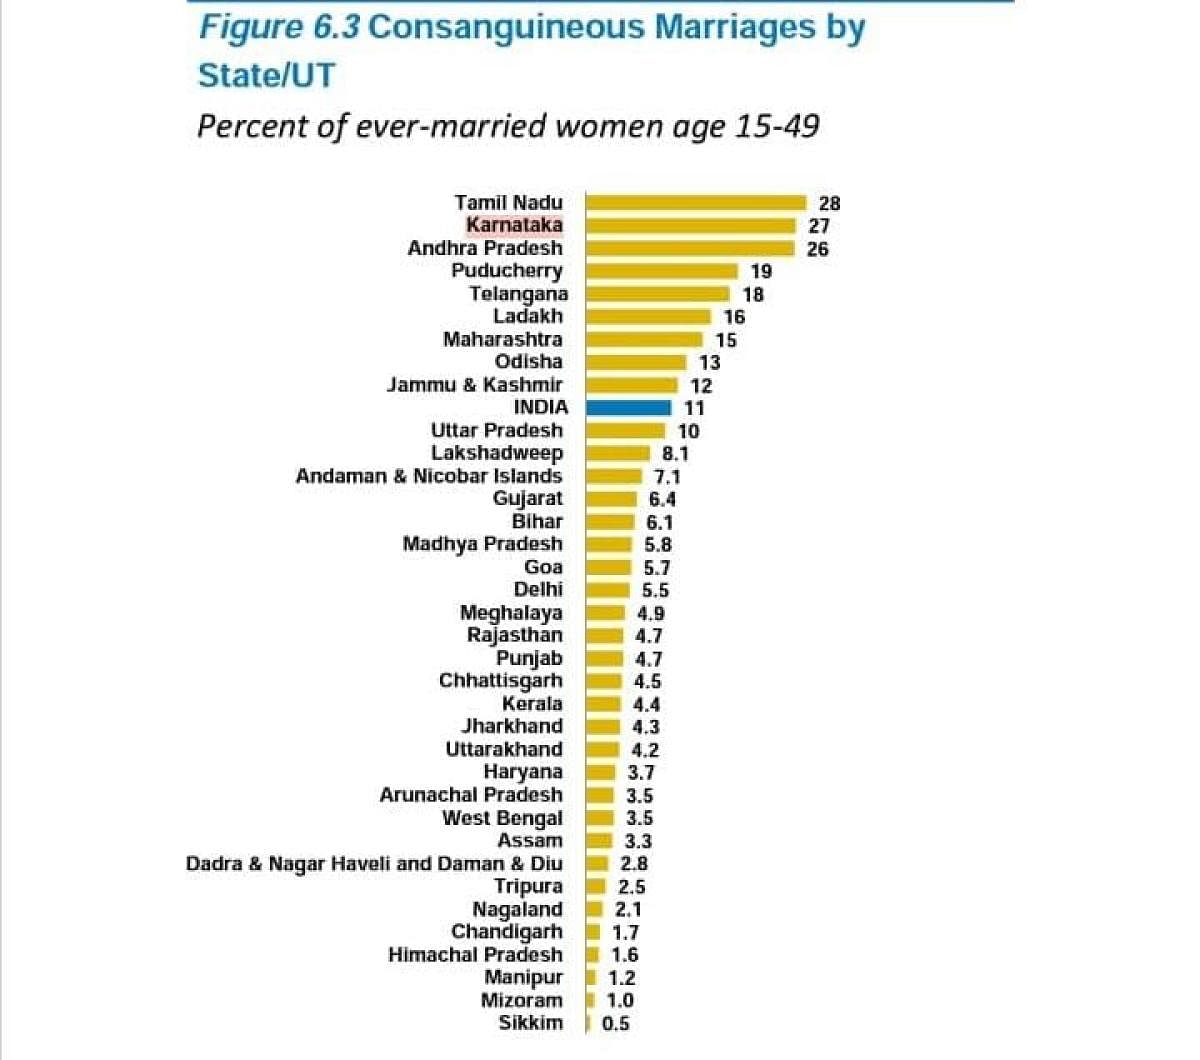 Percentage of consanguineous marriages in states/UTs